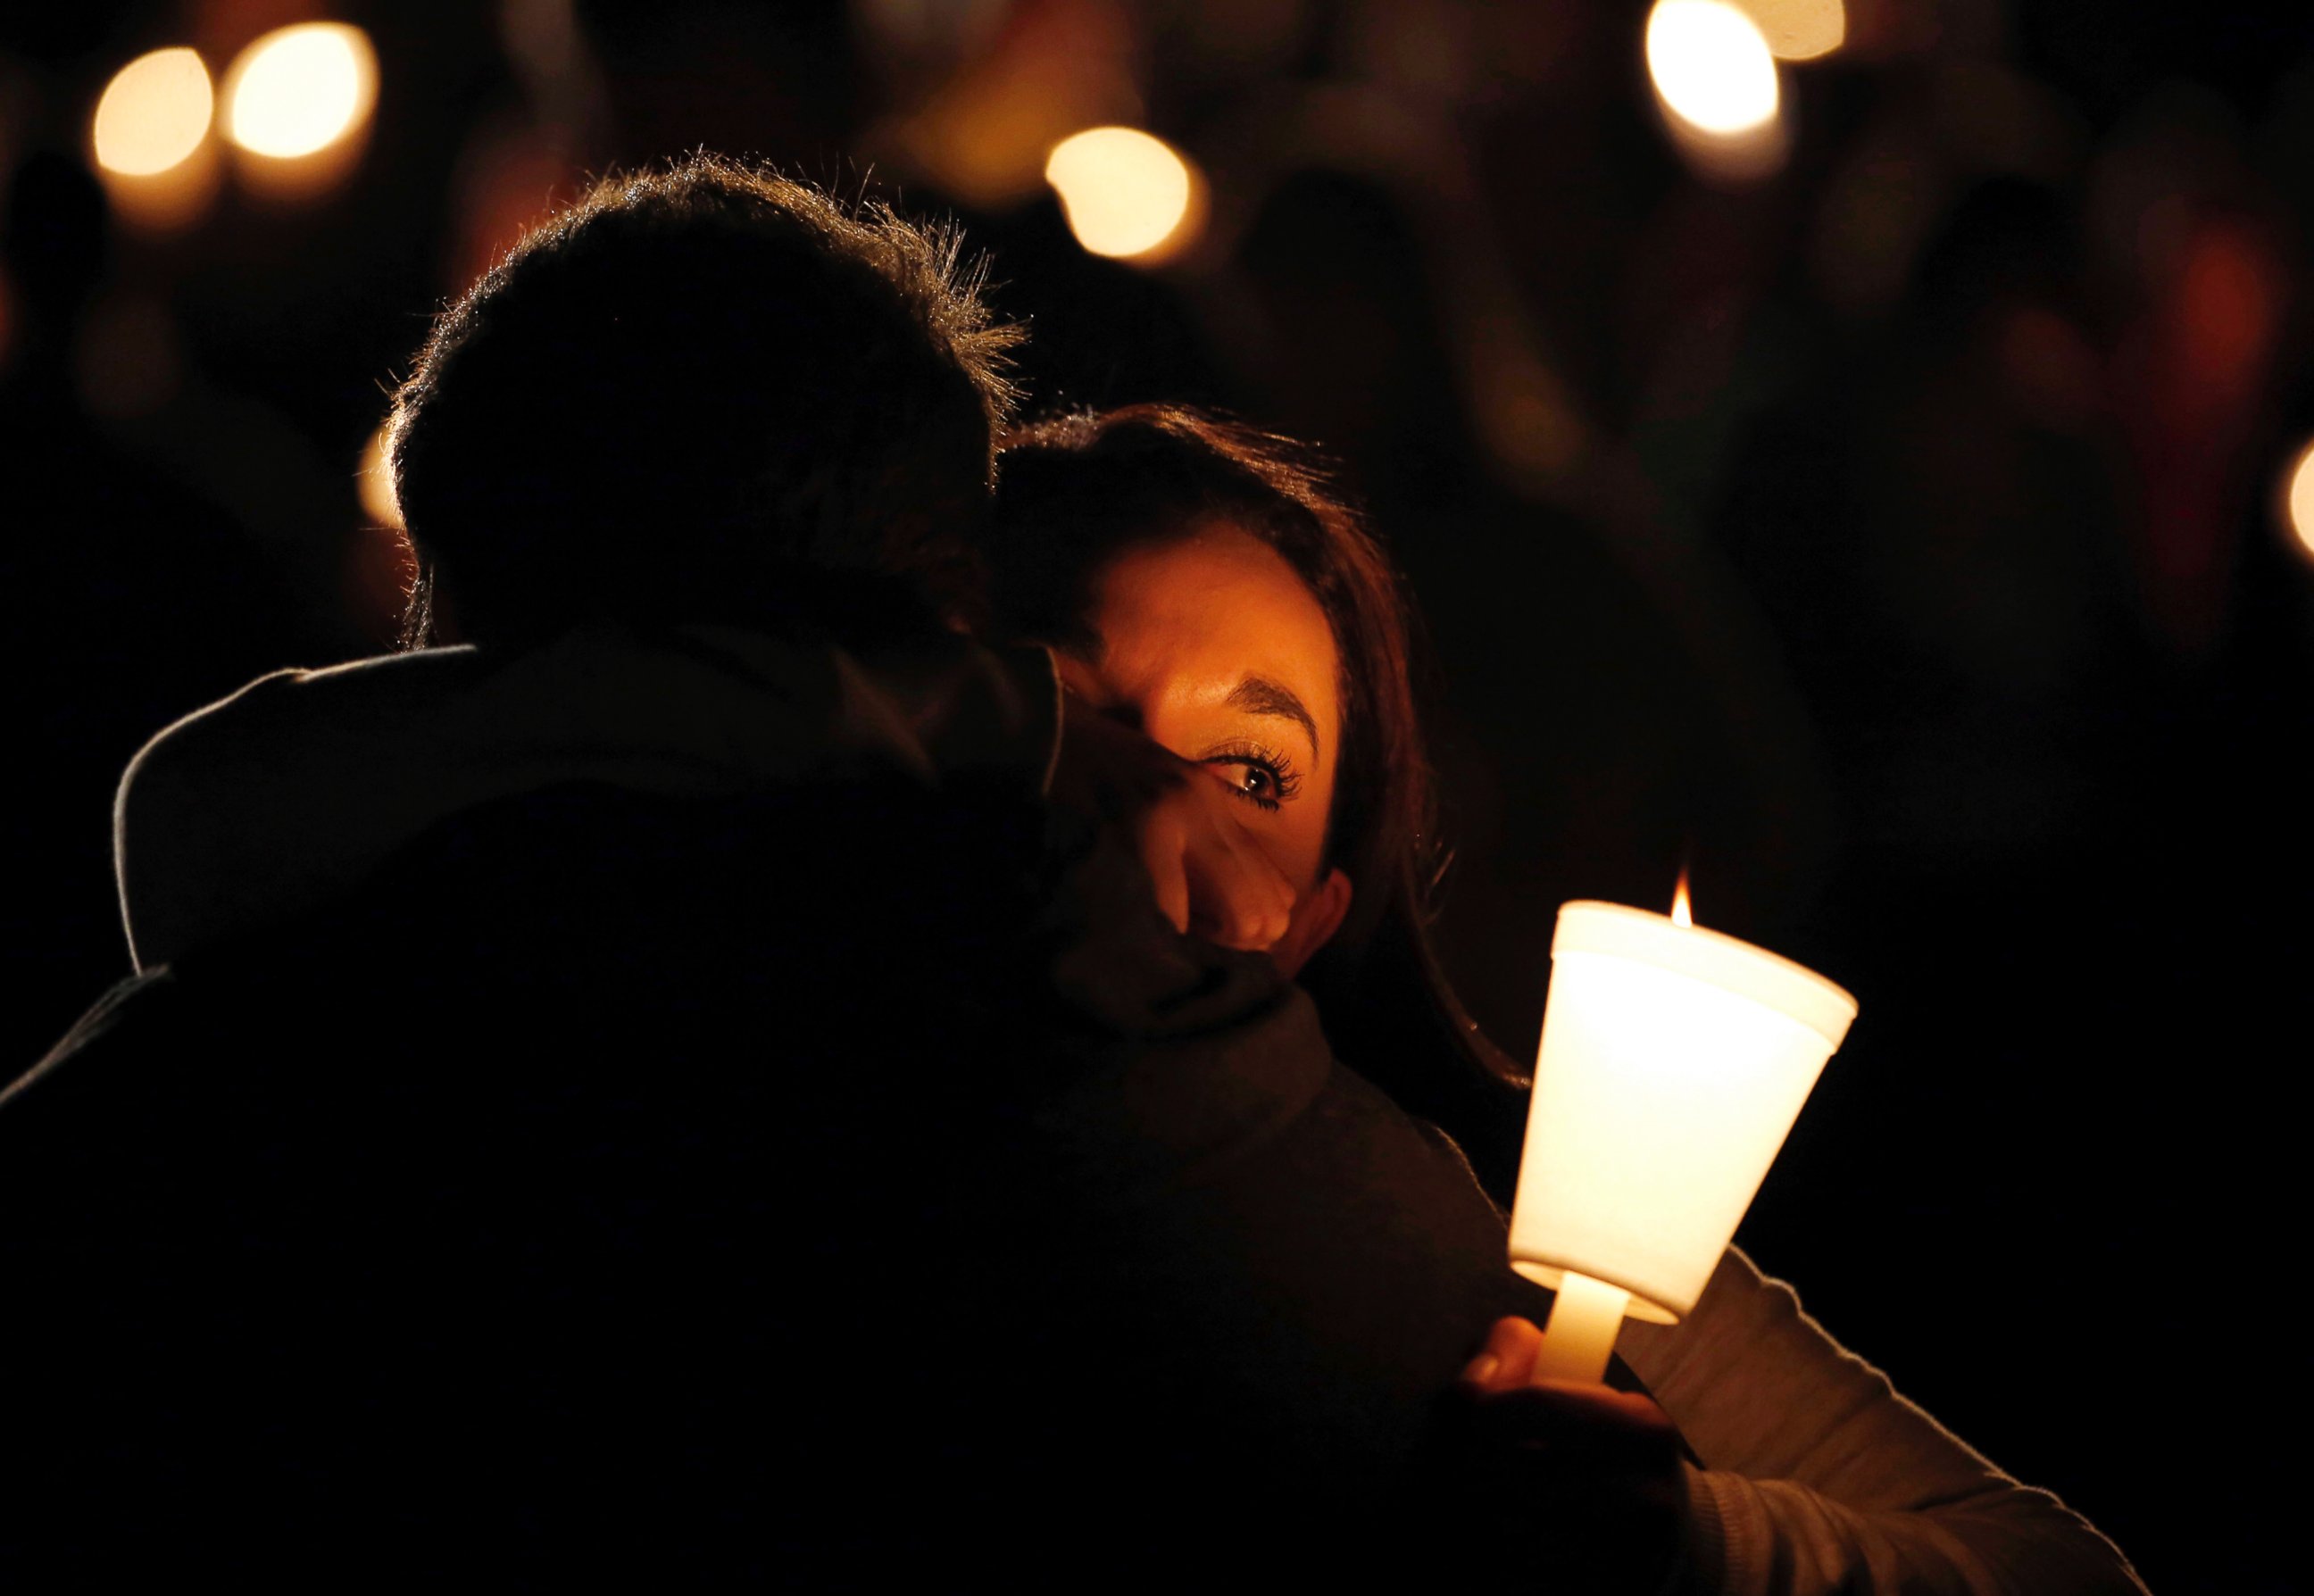 PHOTO: Umpqua Community College student Nichole Zamarripa, right, is consoled during a candle light vigil for those killed during a fatal shooting at the school, Oct. 1, 2015, in Roseburg, Ore.